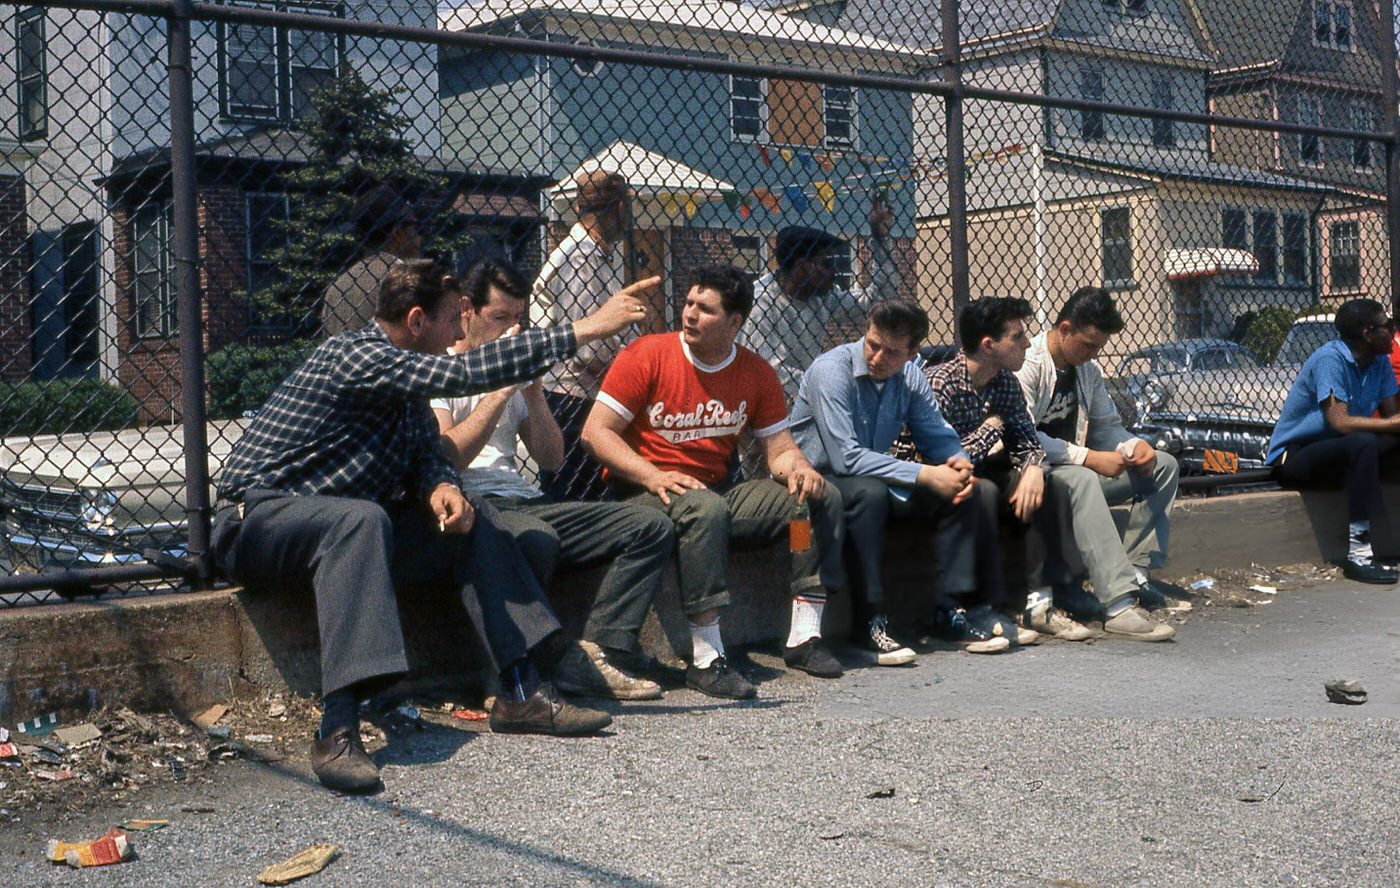 Unidentified Men Talk, Leaning Against A Chain-Link Fence In The Ps 143 (Later Named Ps 143 Louis Armstrong) Yard In Corona, 1960S.